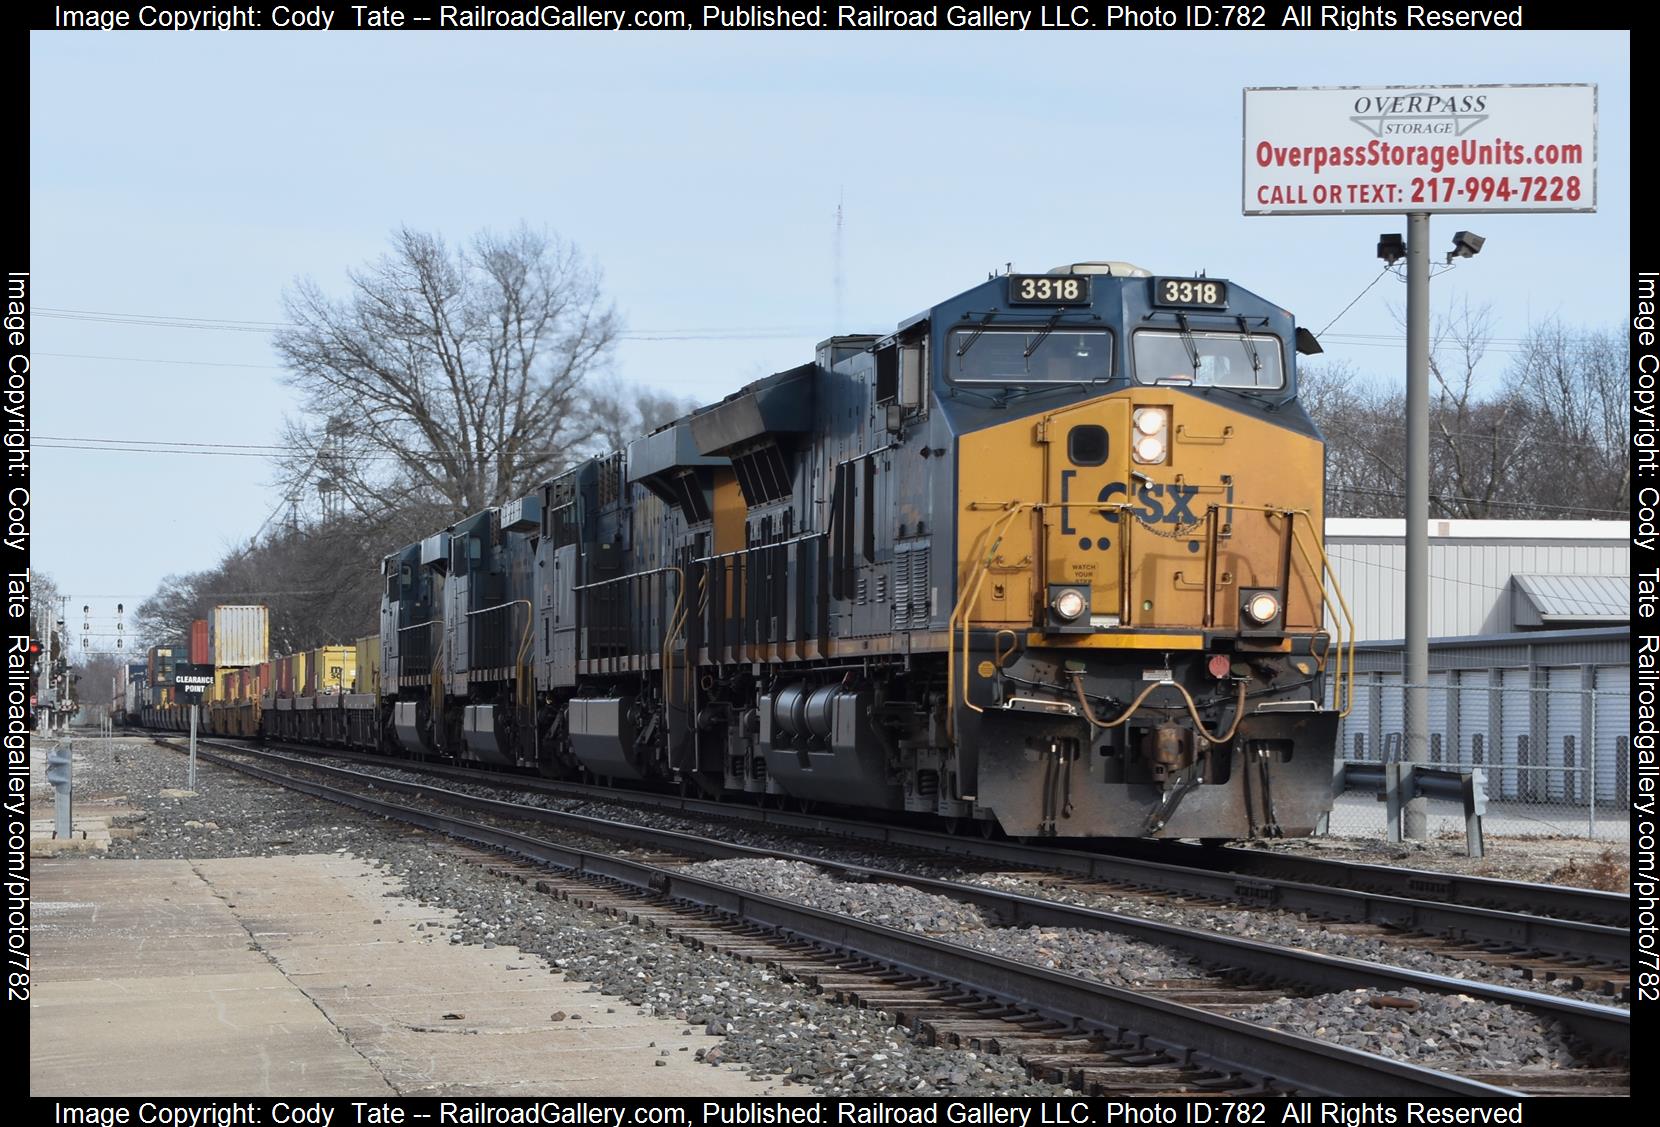 CSXT 3318 is a class ET44AC and  is pictured in Effingham , Illinois, USA.  This was taken along the Saint Louis subdivision  on the CSX Transportation. Photo Copyright: Cody  Tate uploaded to Railroad Gallery on 02/28/2023. This photograph of CSXT 3318 was taken on Saturday, February 18, 2023. All Rights Reserved. 